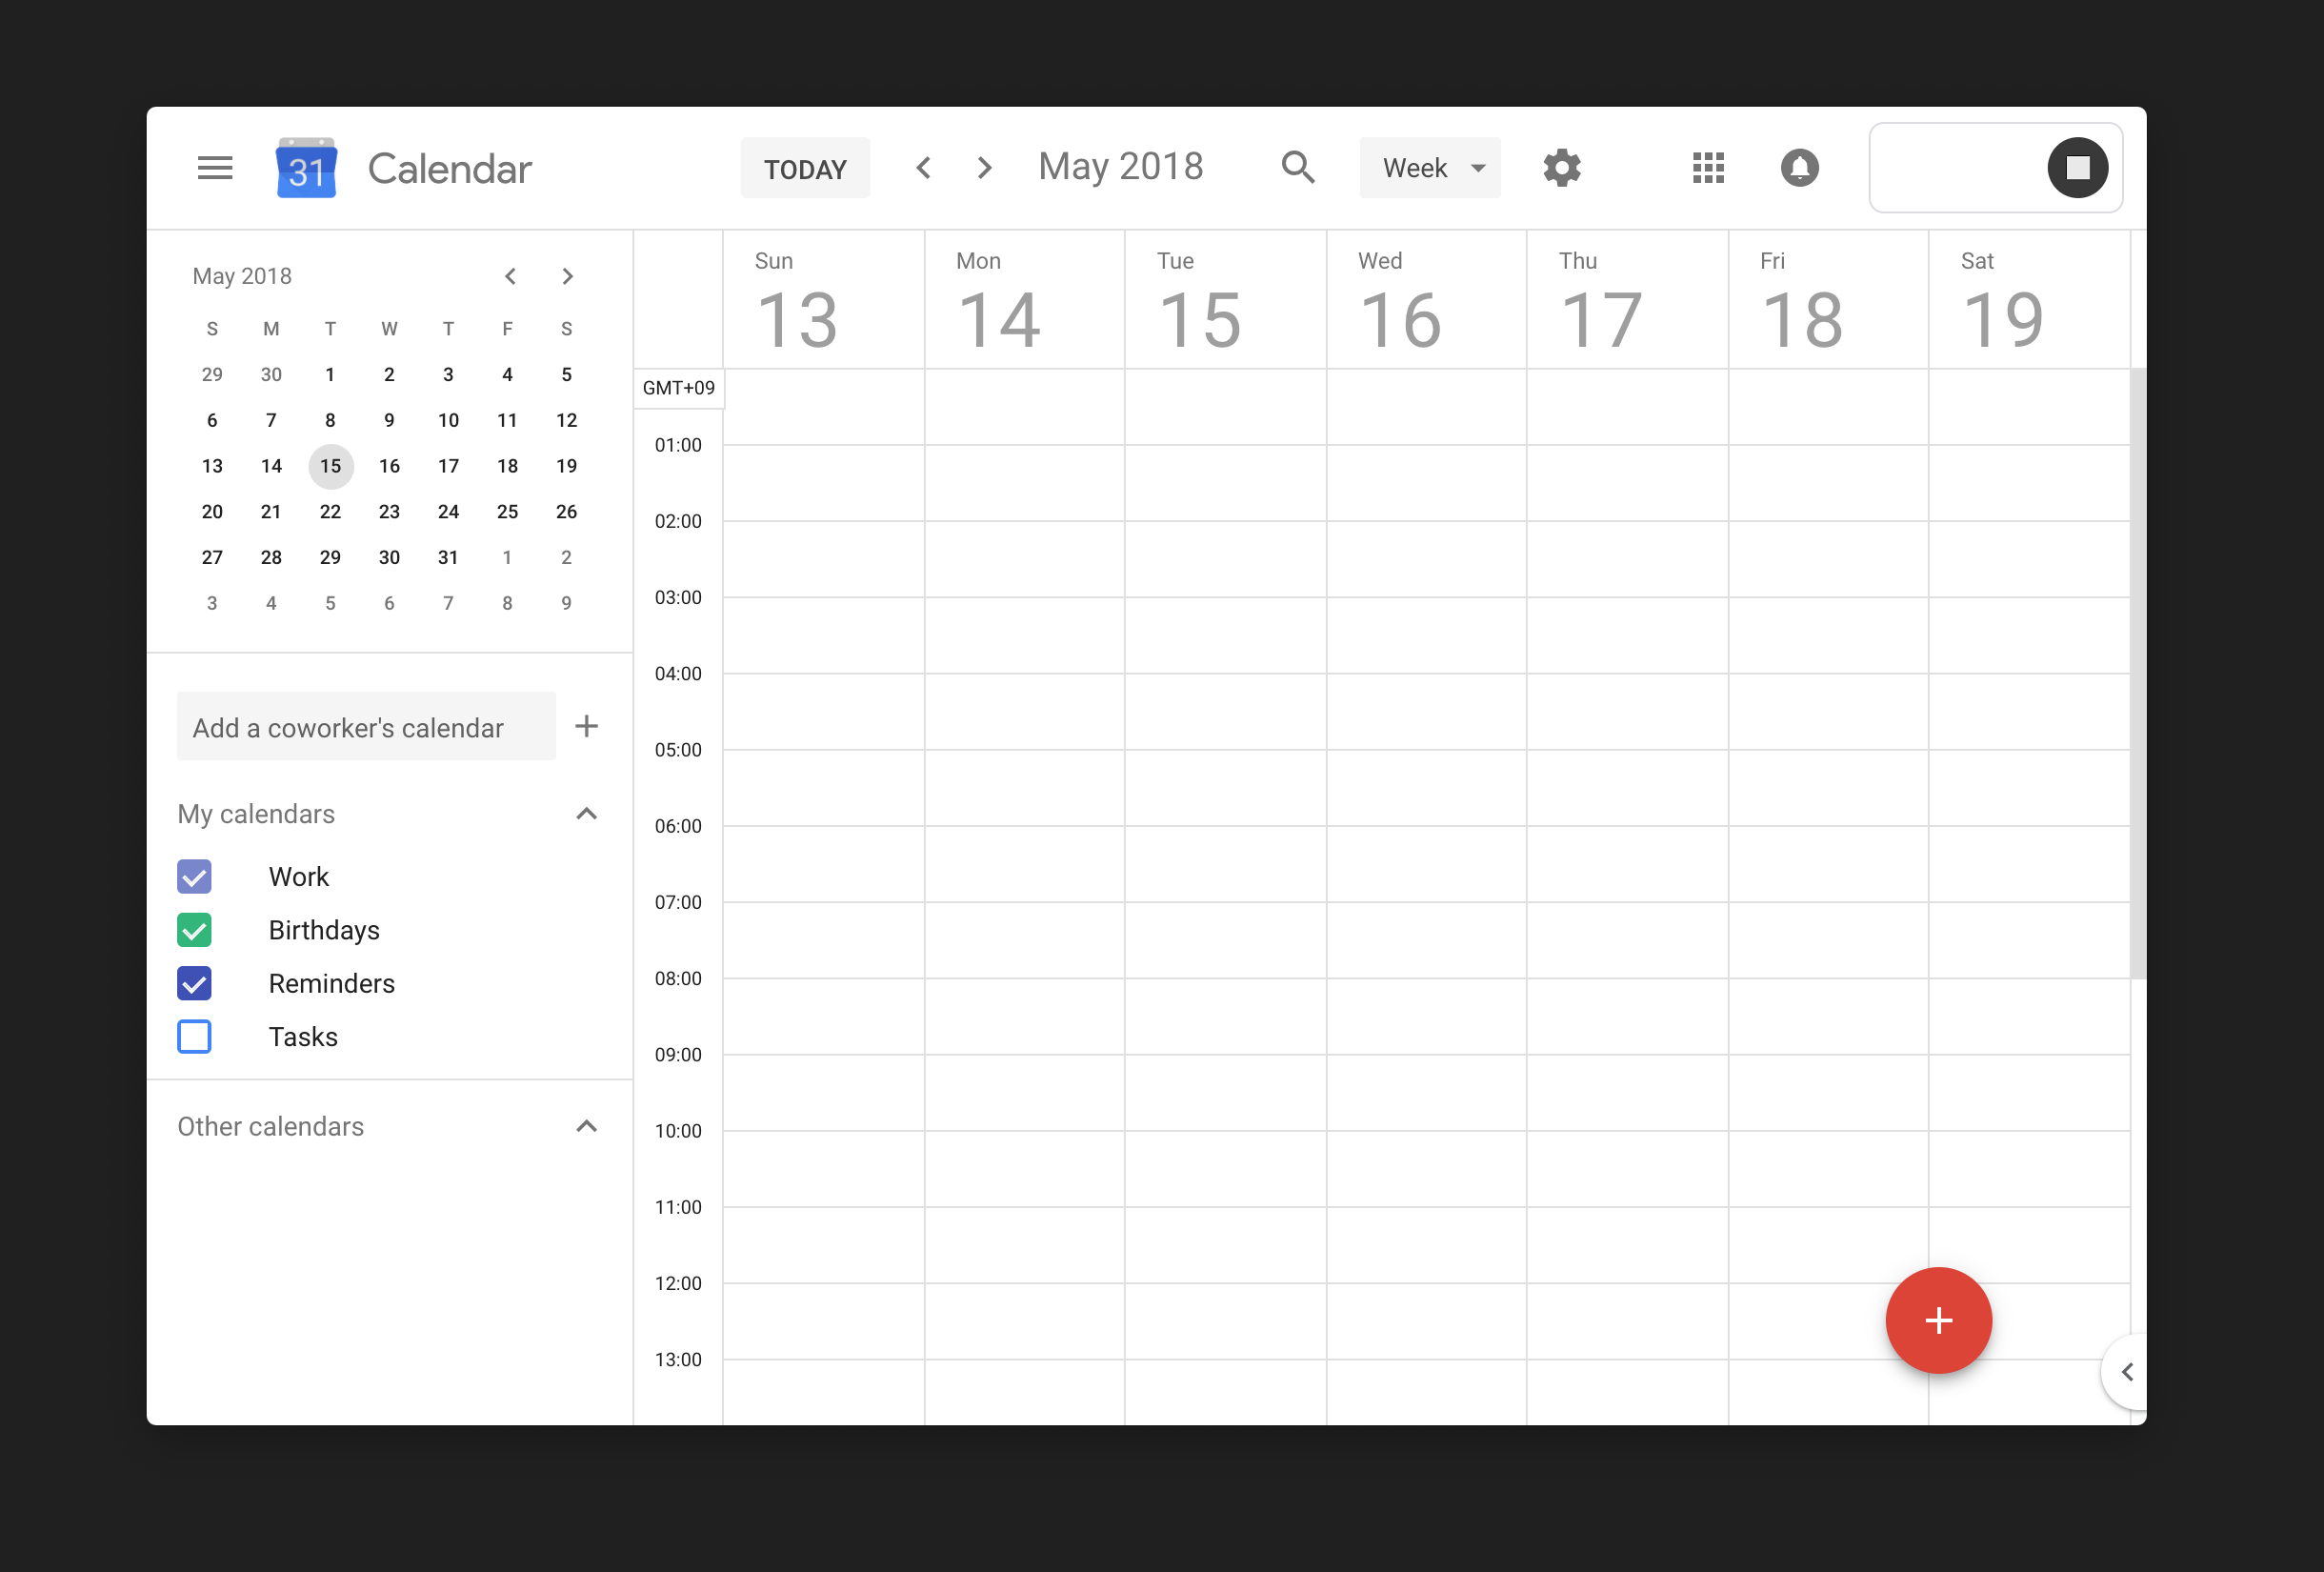 Google Calendar's UI, with a view of seven days and 30-minute slots for scheduling. Not particularly inspiring.